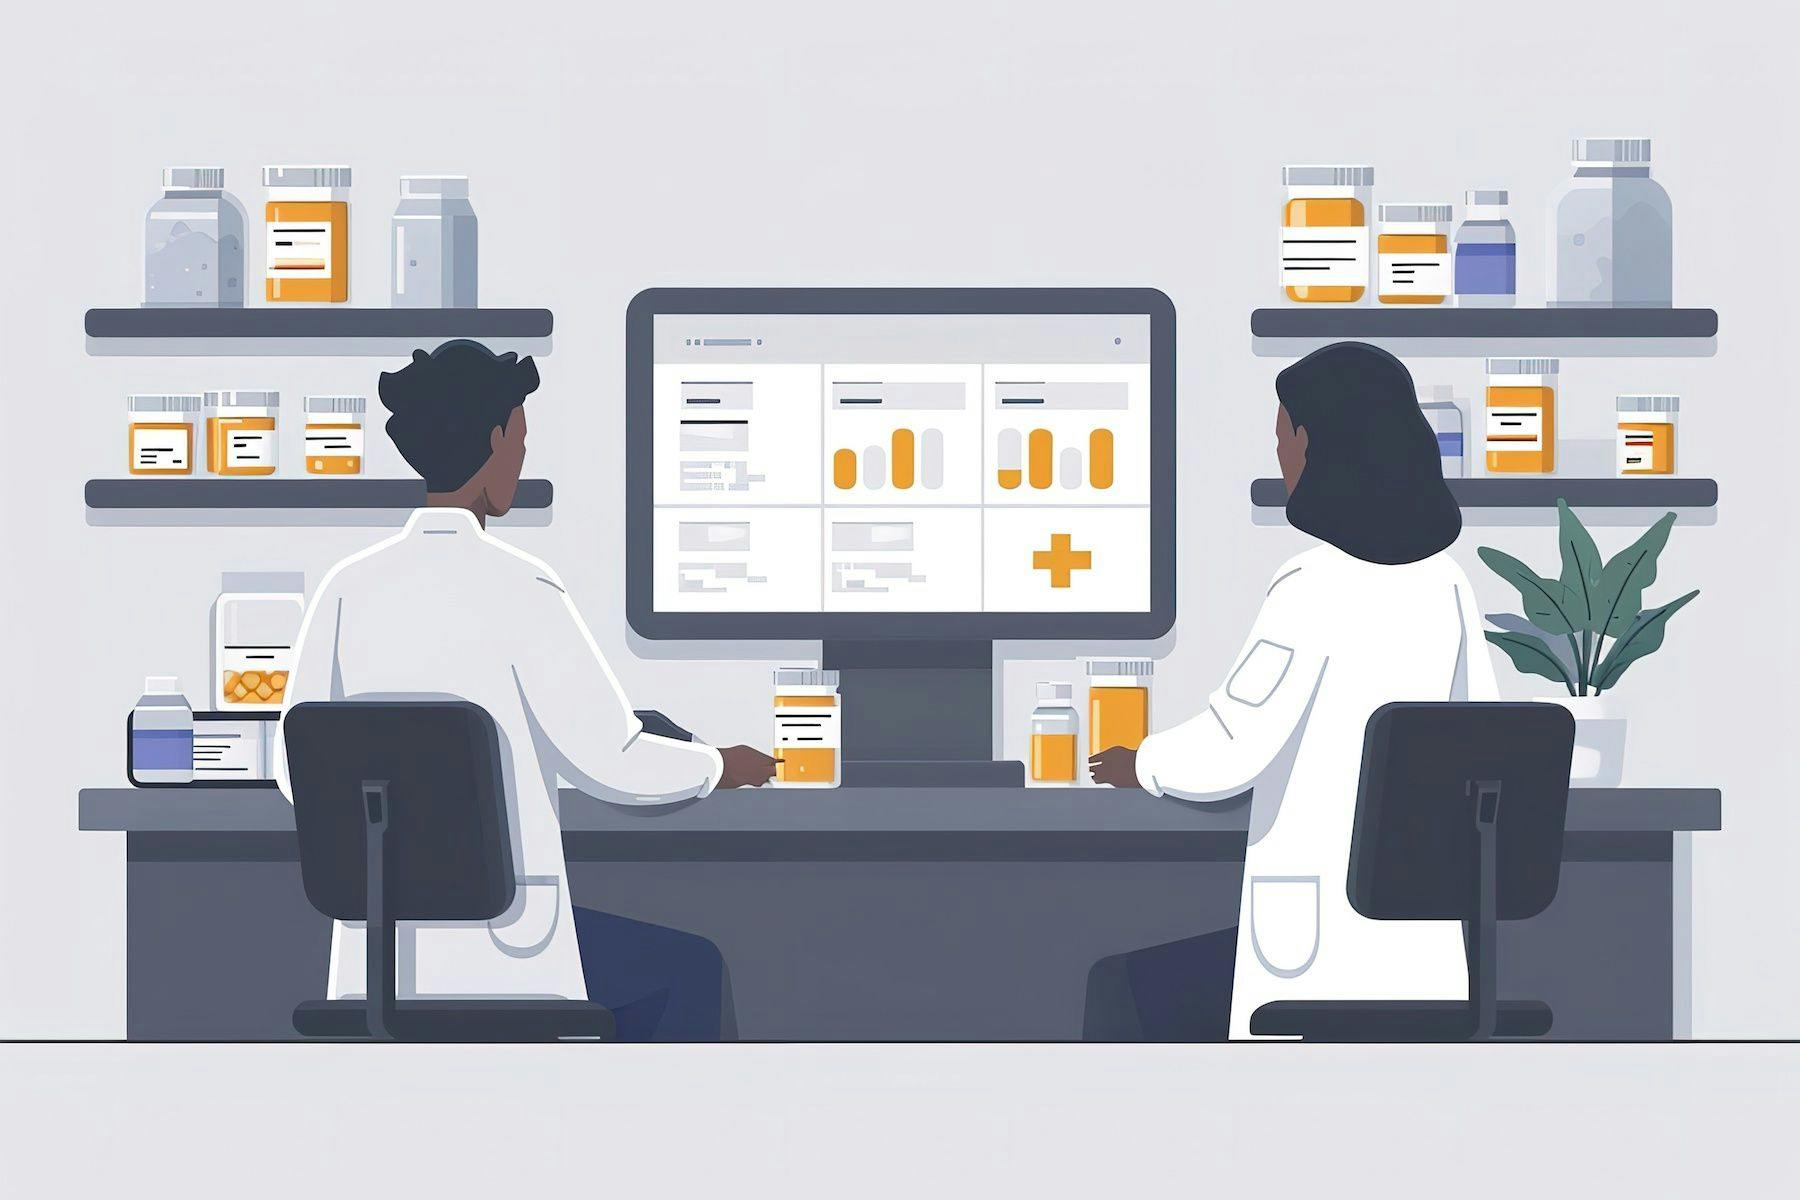 Telepharmacy can empower pharmacists to practice at the top of their license. | image credit: create interior / stock.adobe.com